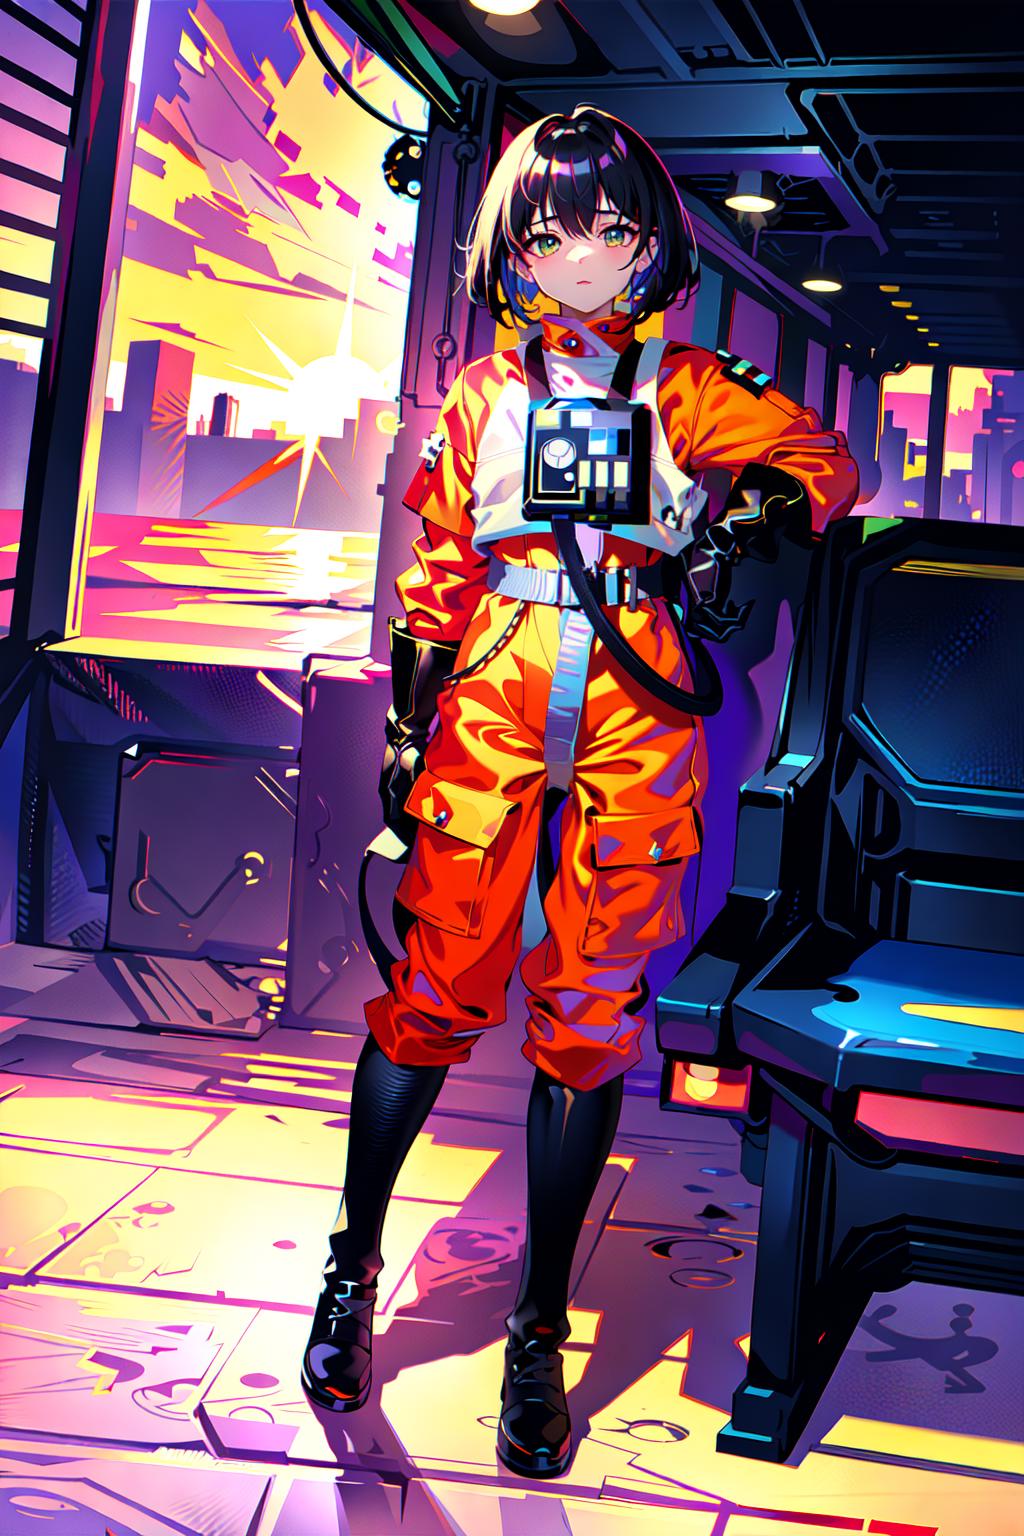 Anime Fighter Pilot Raptor Girl by AbstractIntuitions on DeviantArt